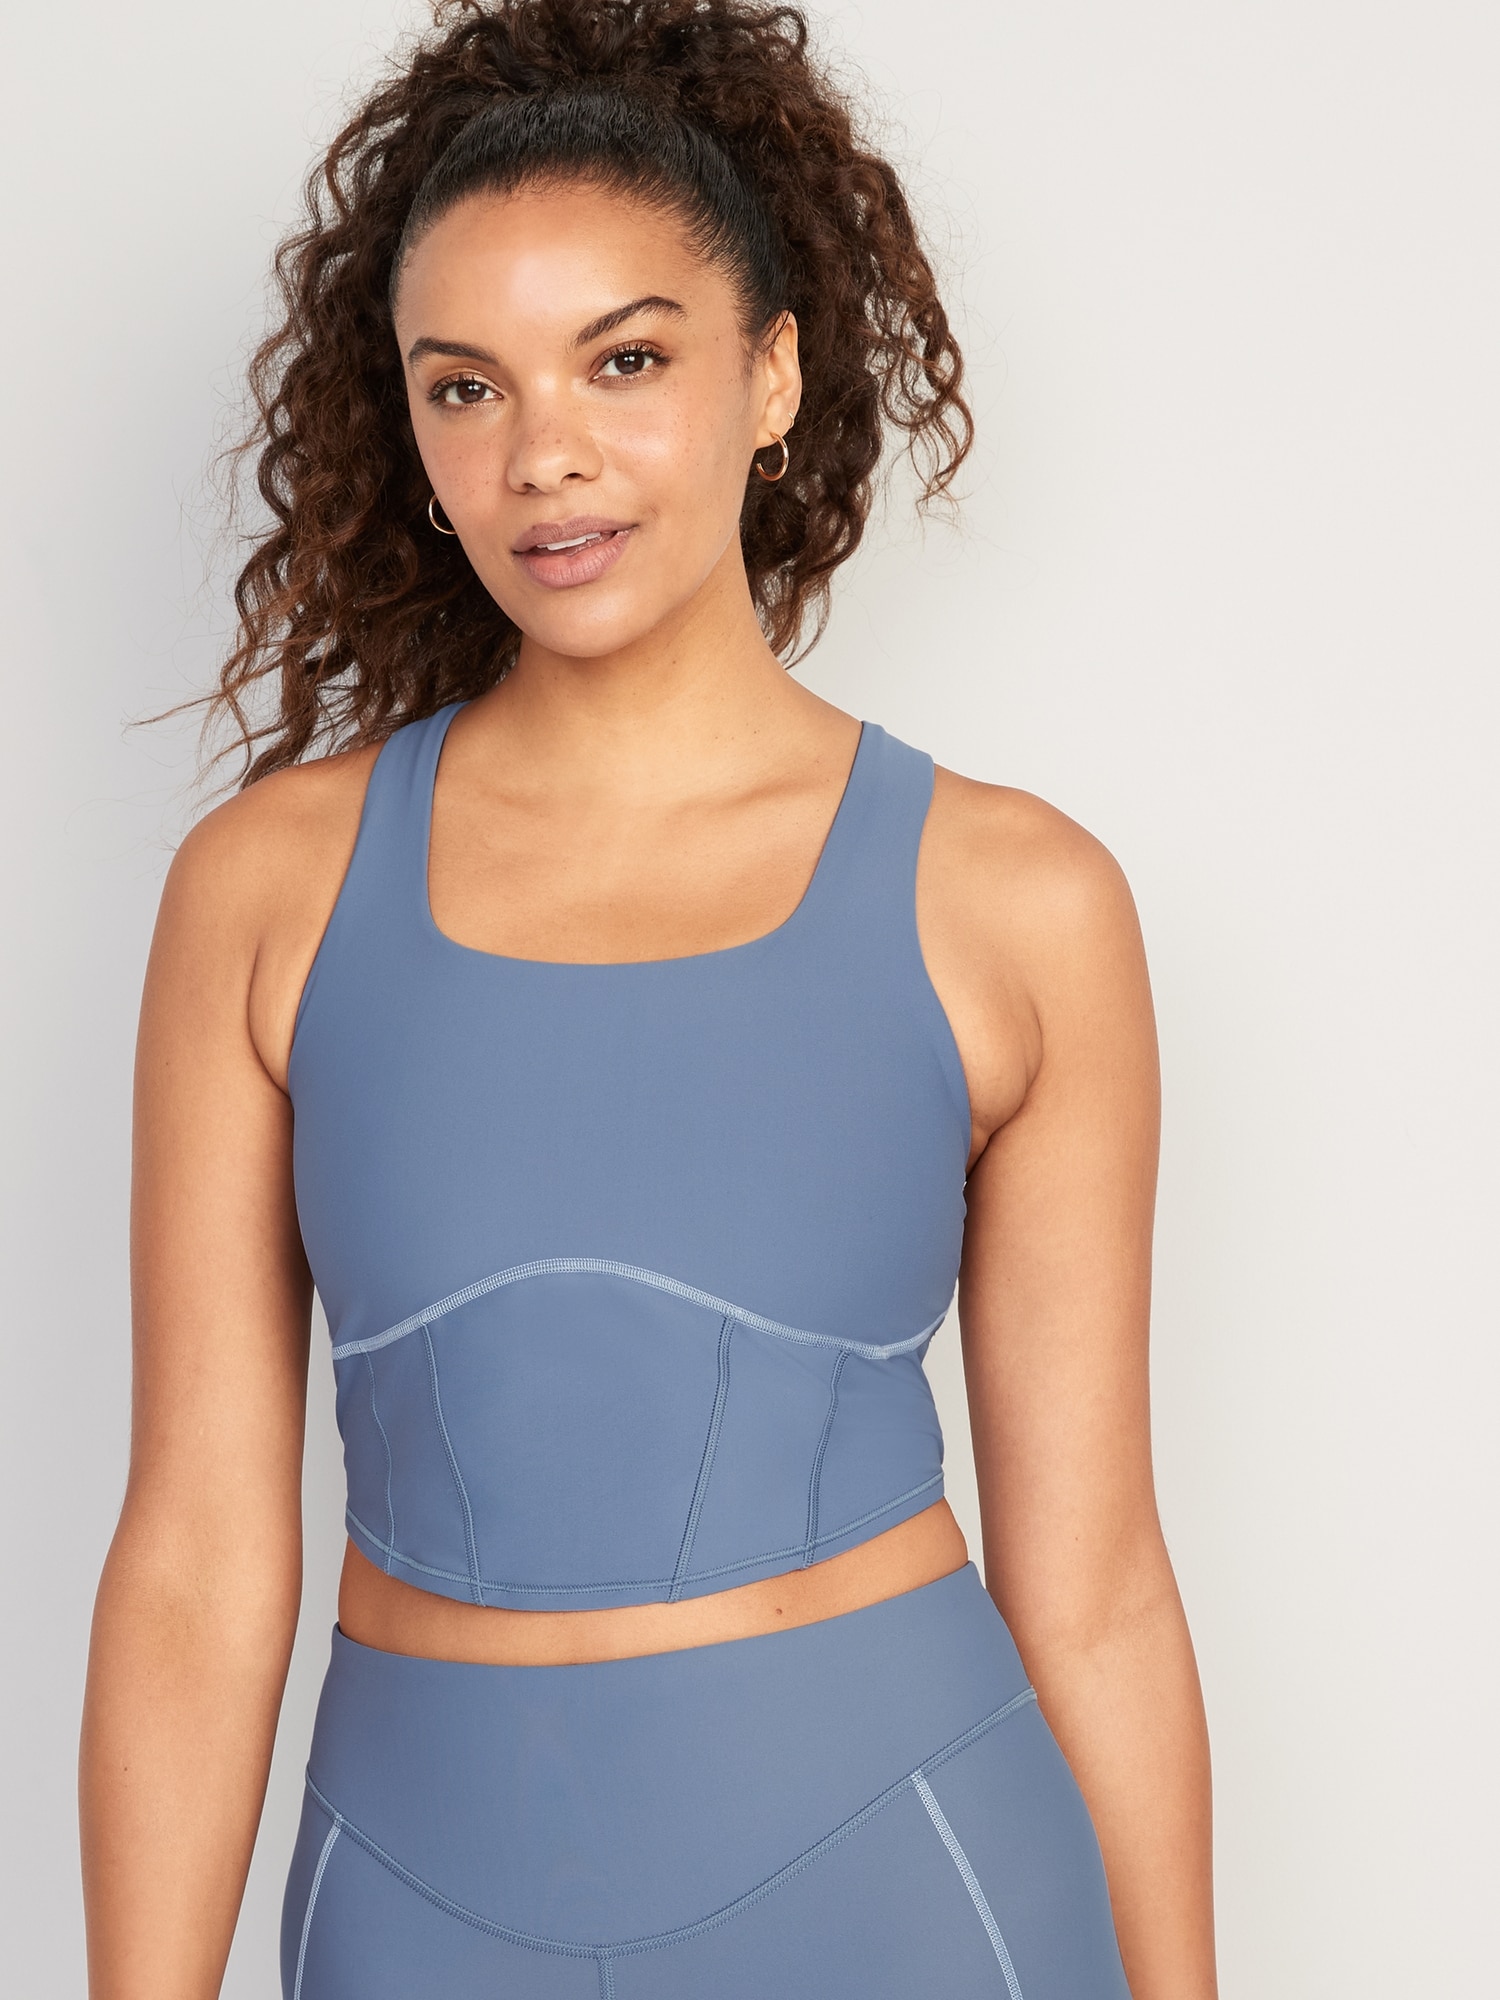 Old Navy PowerSoft Molded Cup Longline Sports Bra for Women